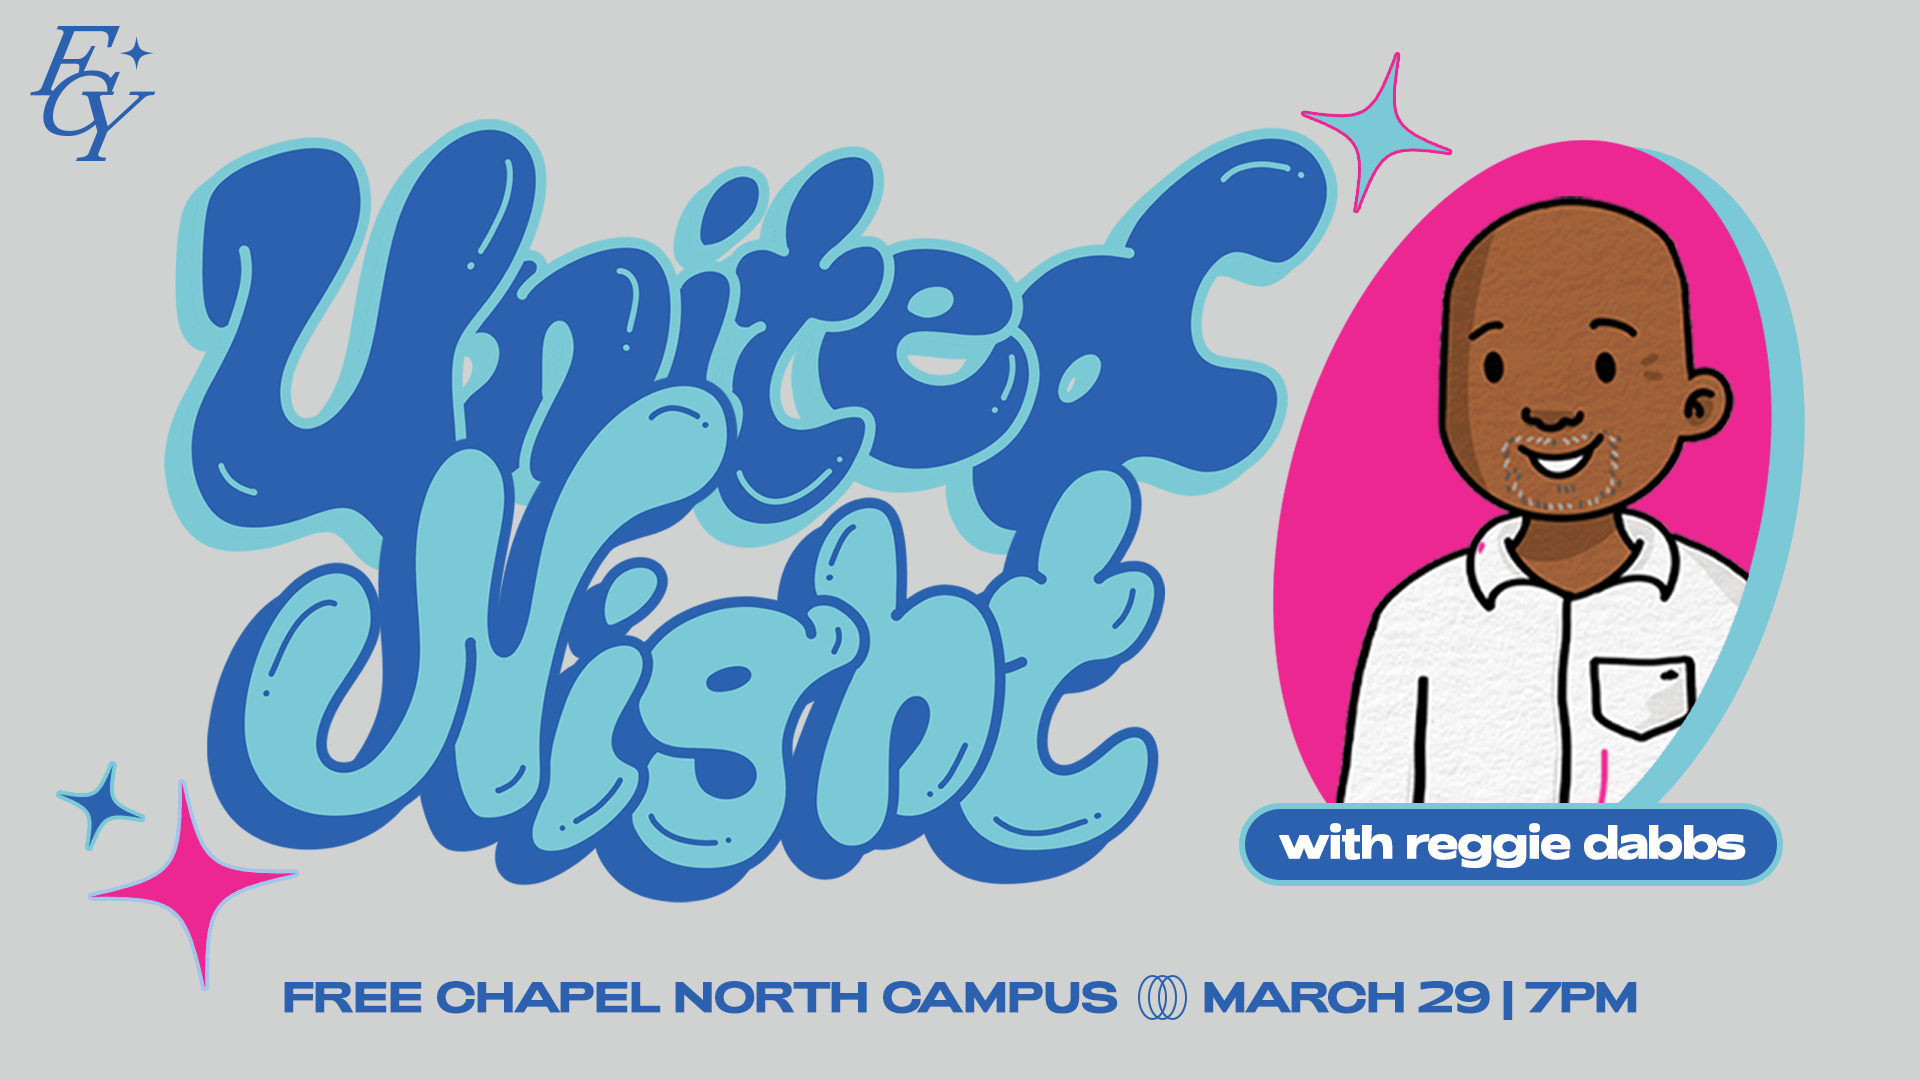 FCY United Night with Reggie Dabbs at the Braselton campus